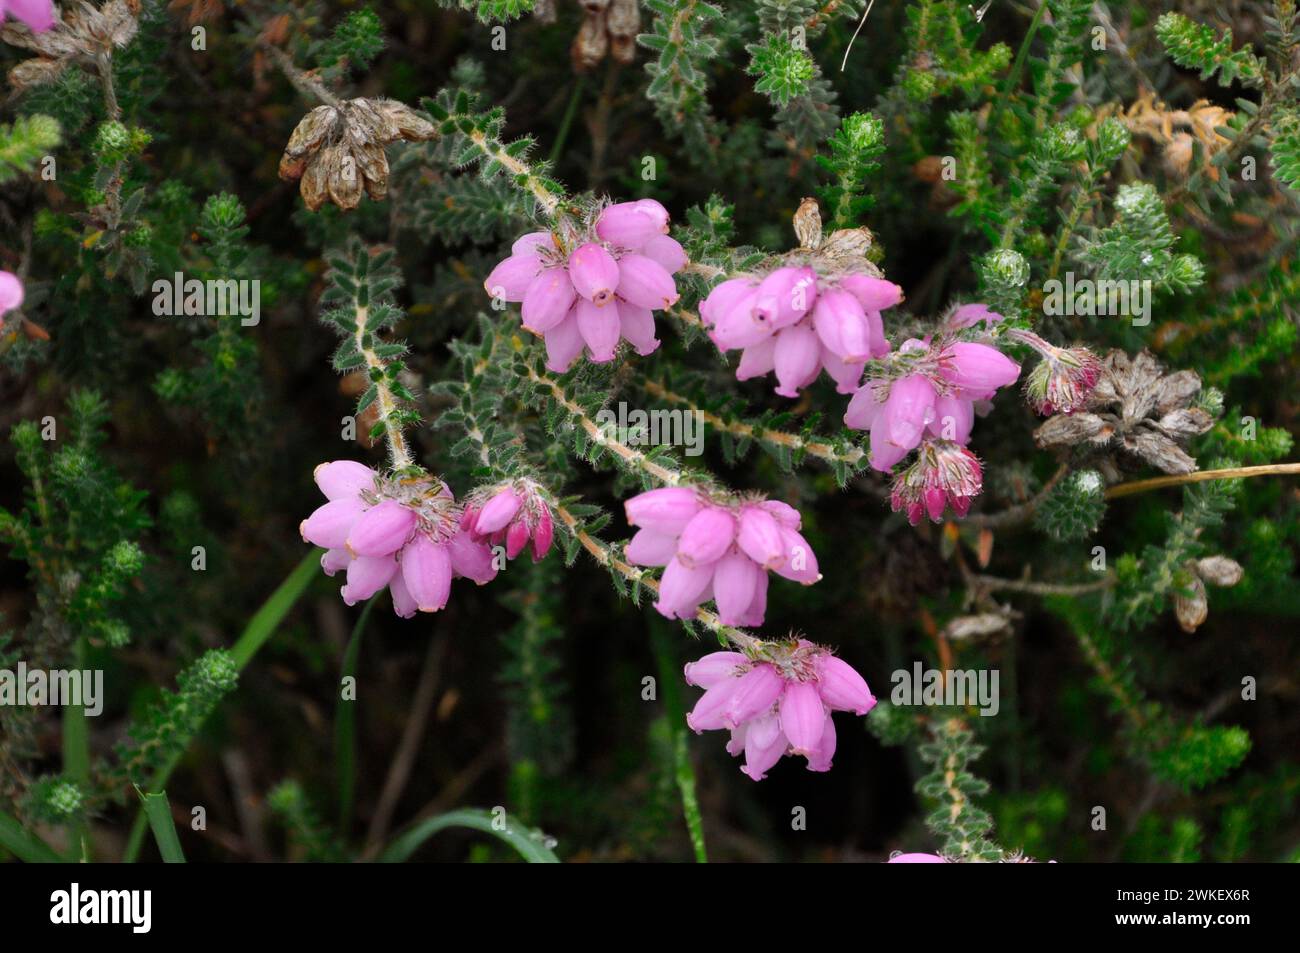 Dorset Heath,'Erica ciliaris', a member of the erica family of plants with pitcher shaped pink/red flowers, New Forest, Hampshire, UK Stock Photo